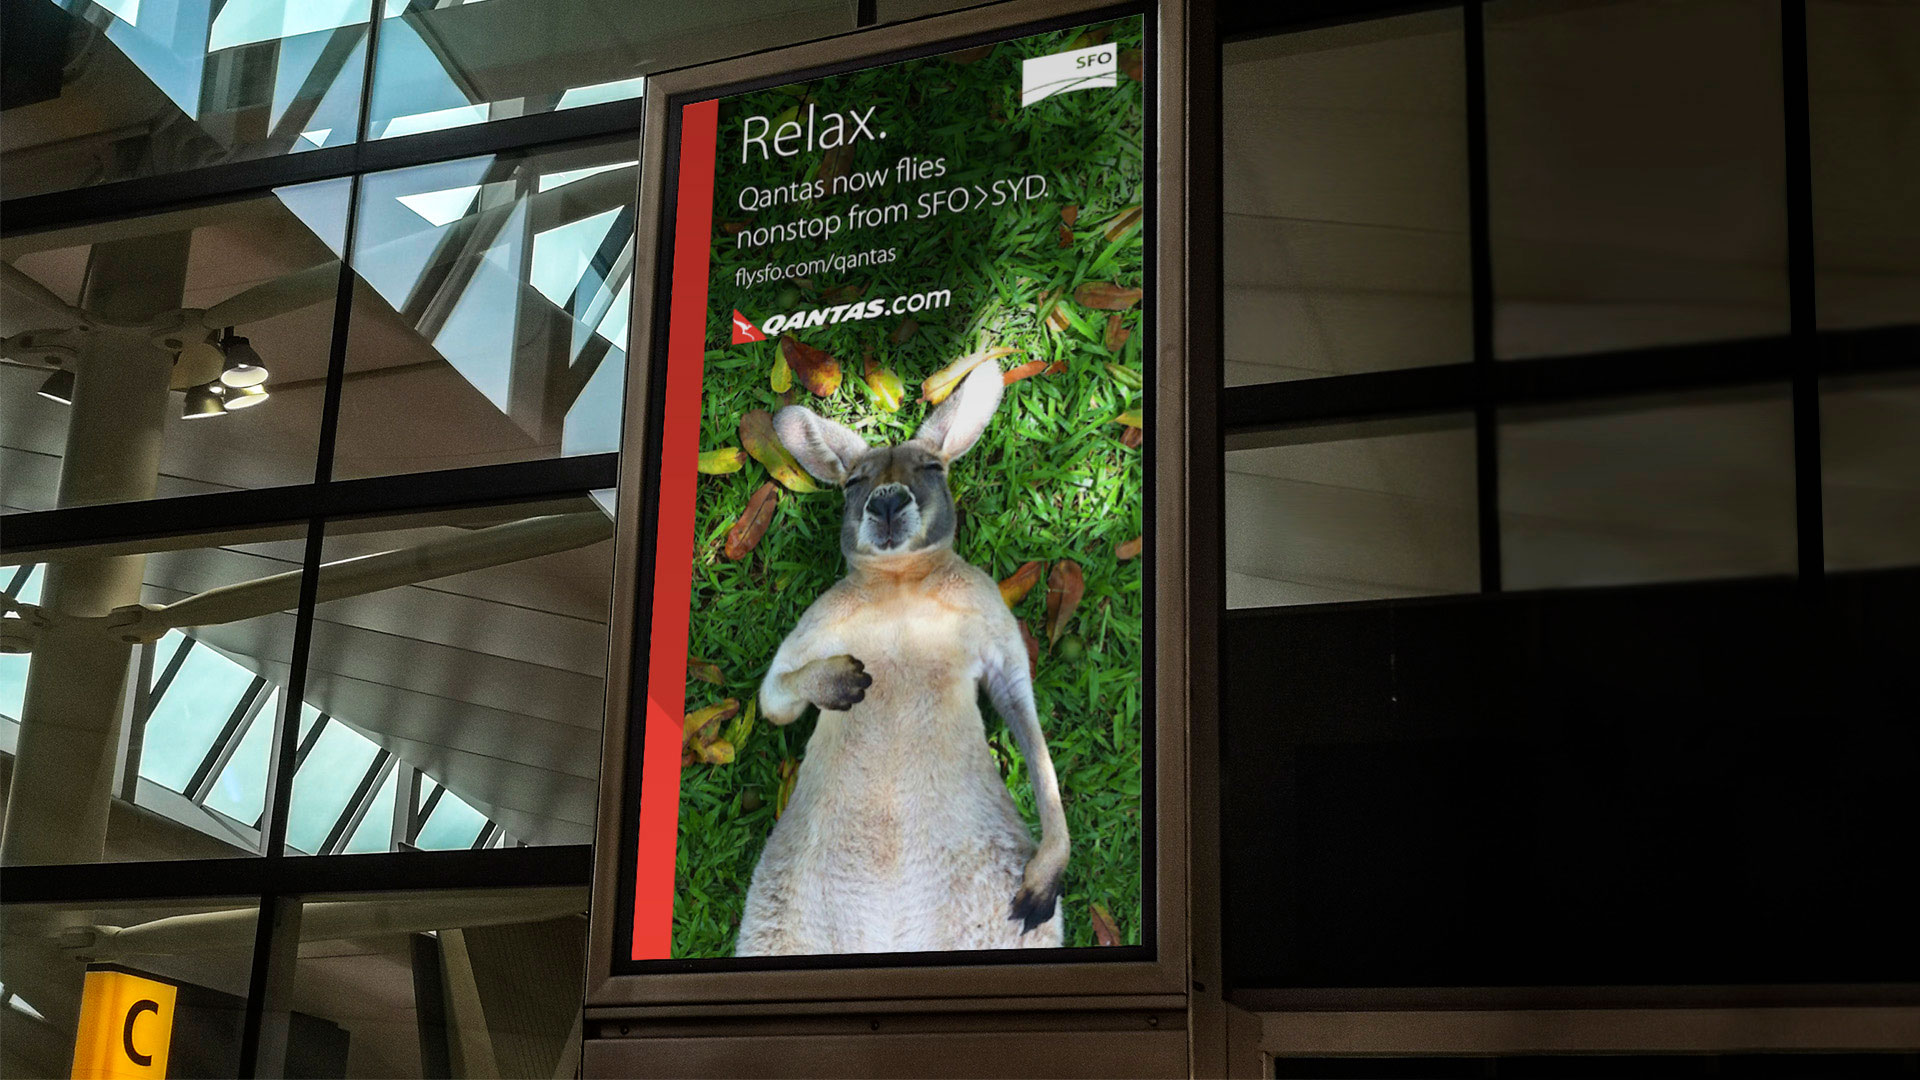 Indoor Ad for Qantas: Relax. Qantas now flies nonstop from SFO to SYD